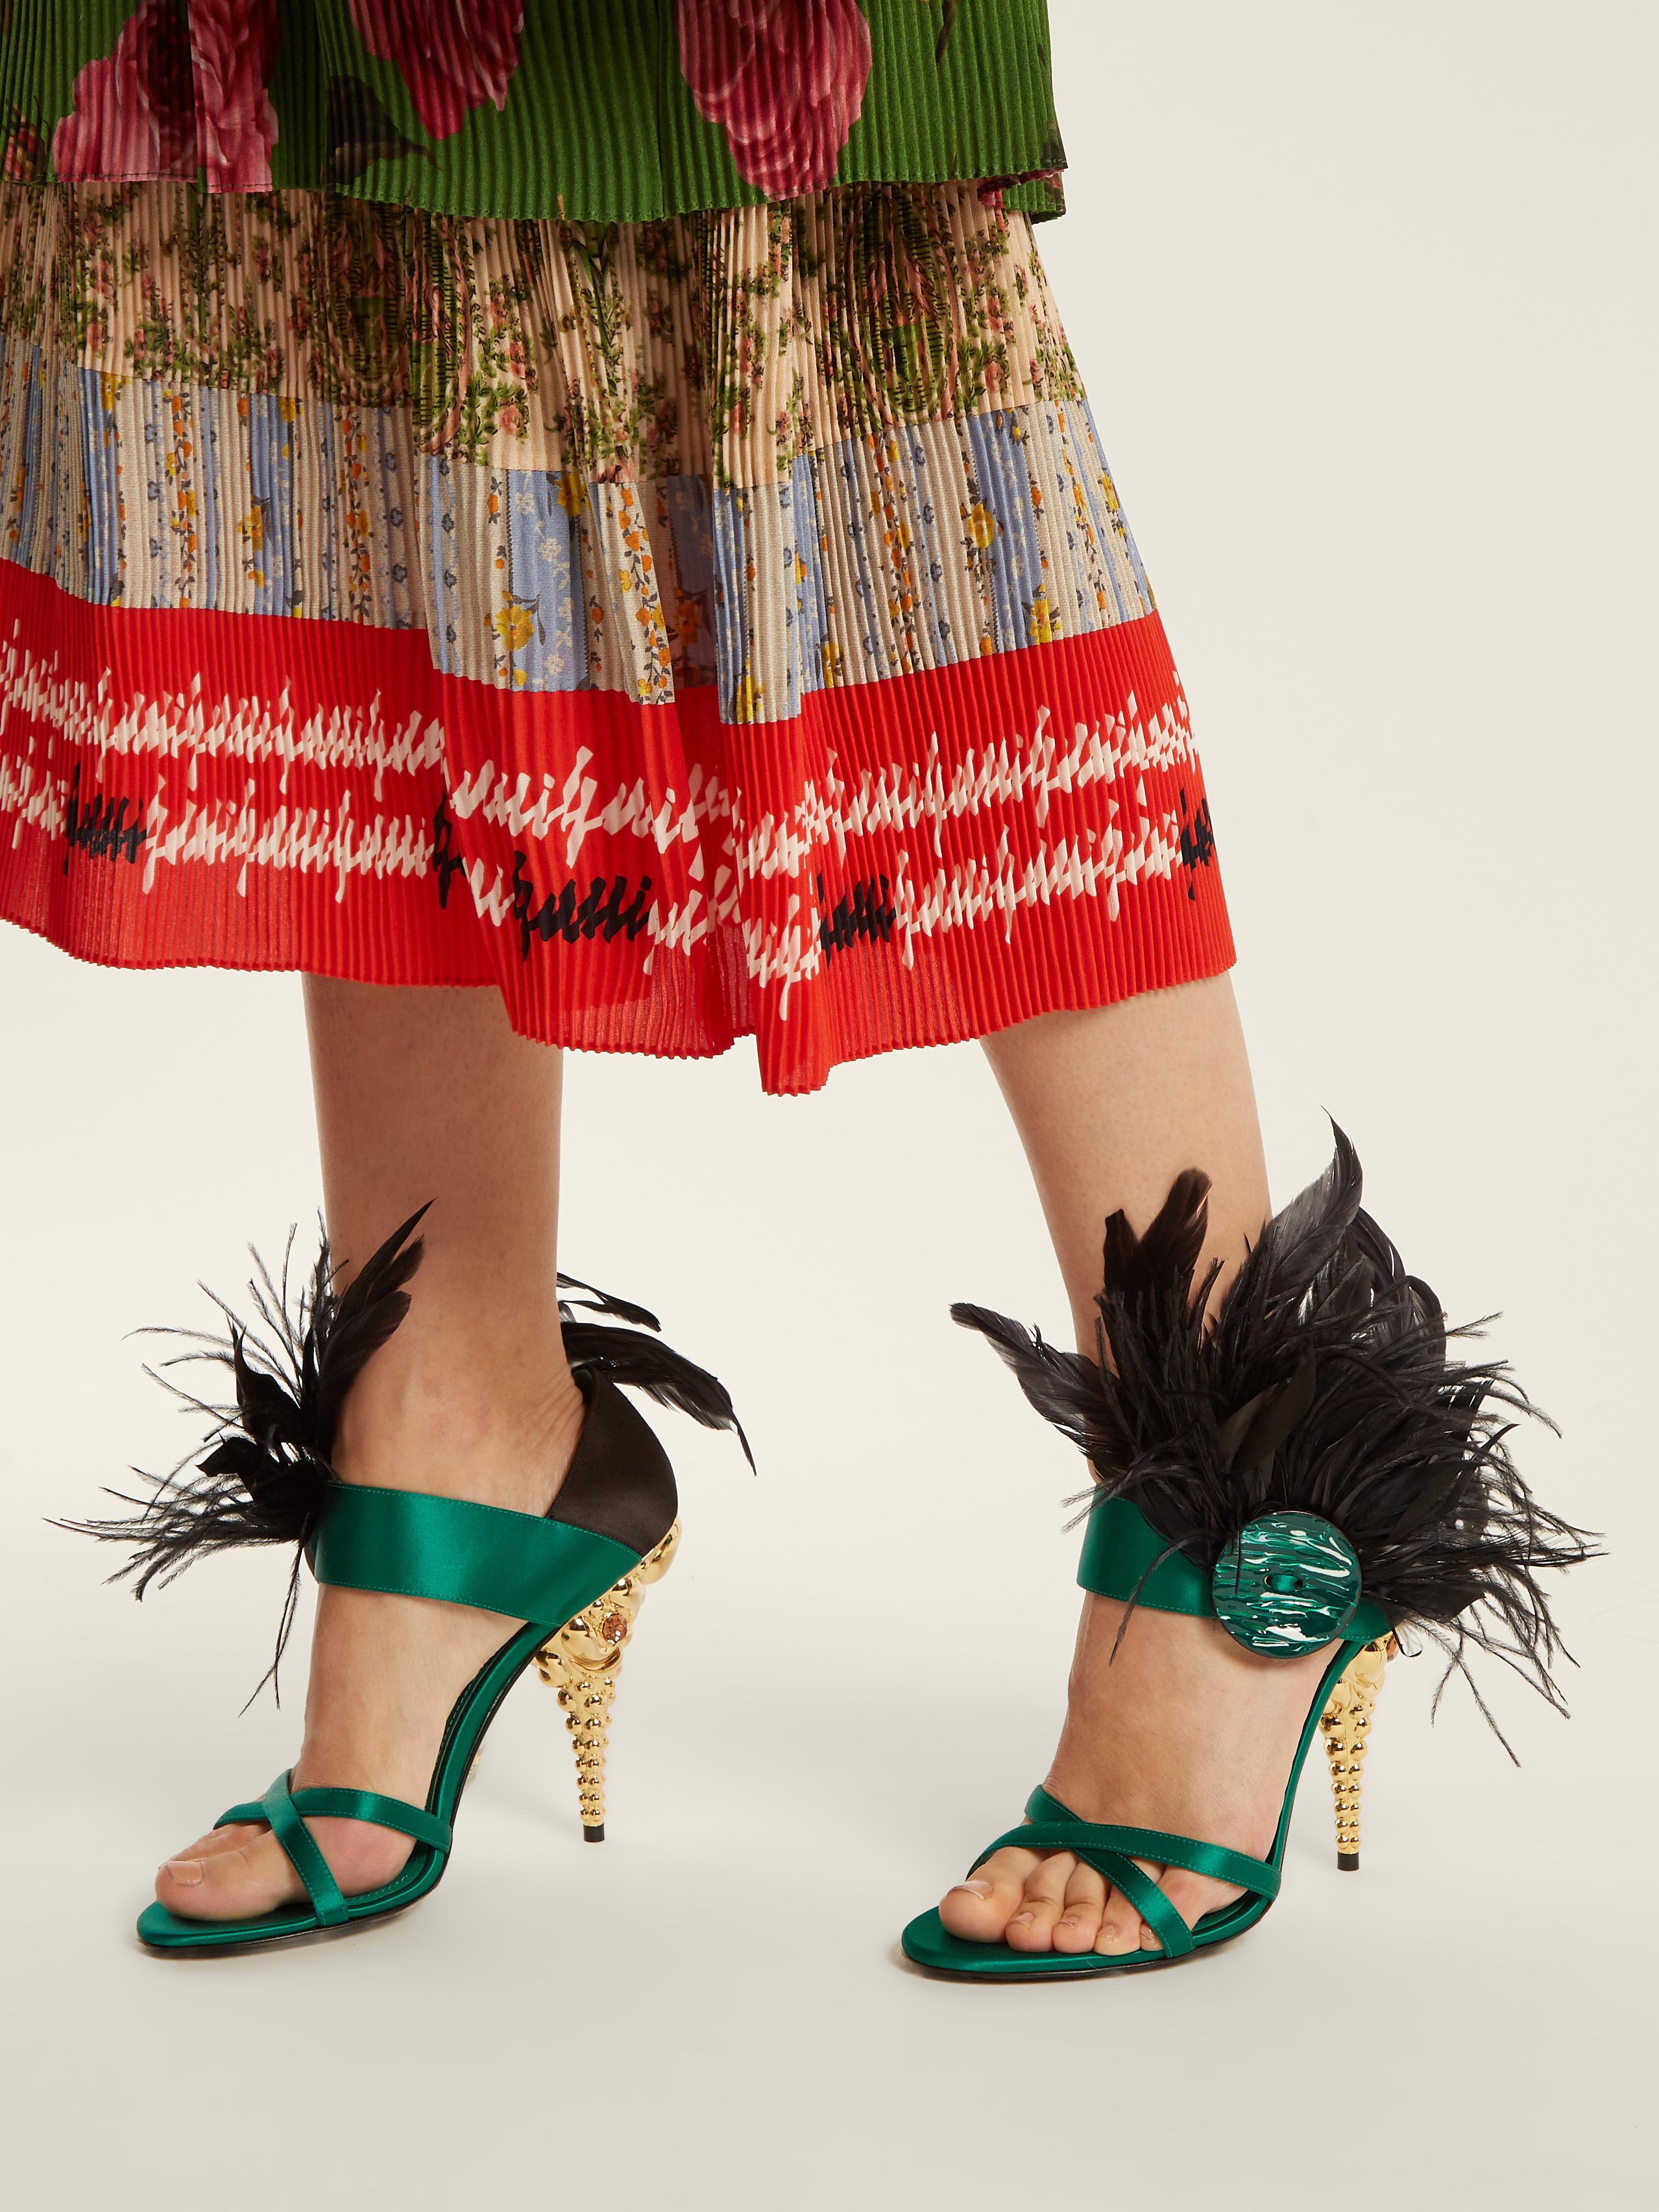 Prada Feather-embellished Satin Sandals in Green - Lyst